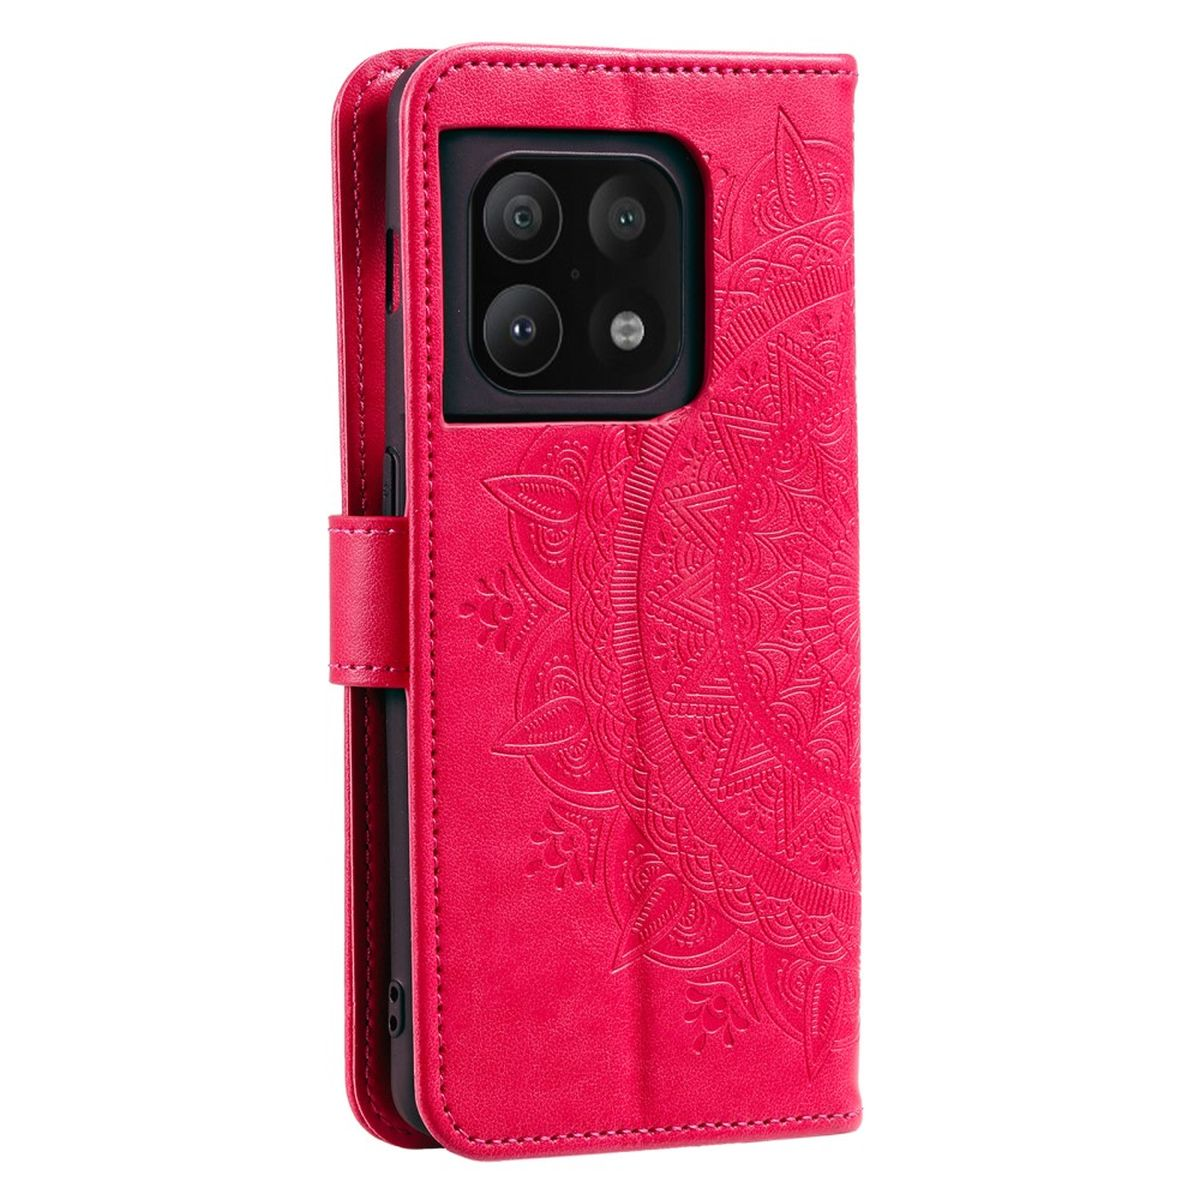 COVERKINGZ Klapphülle Mandala 10 Pro 5G, Pink Muster, OnePlus, mit Bookcover